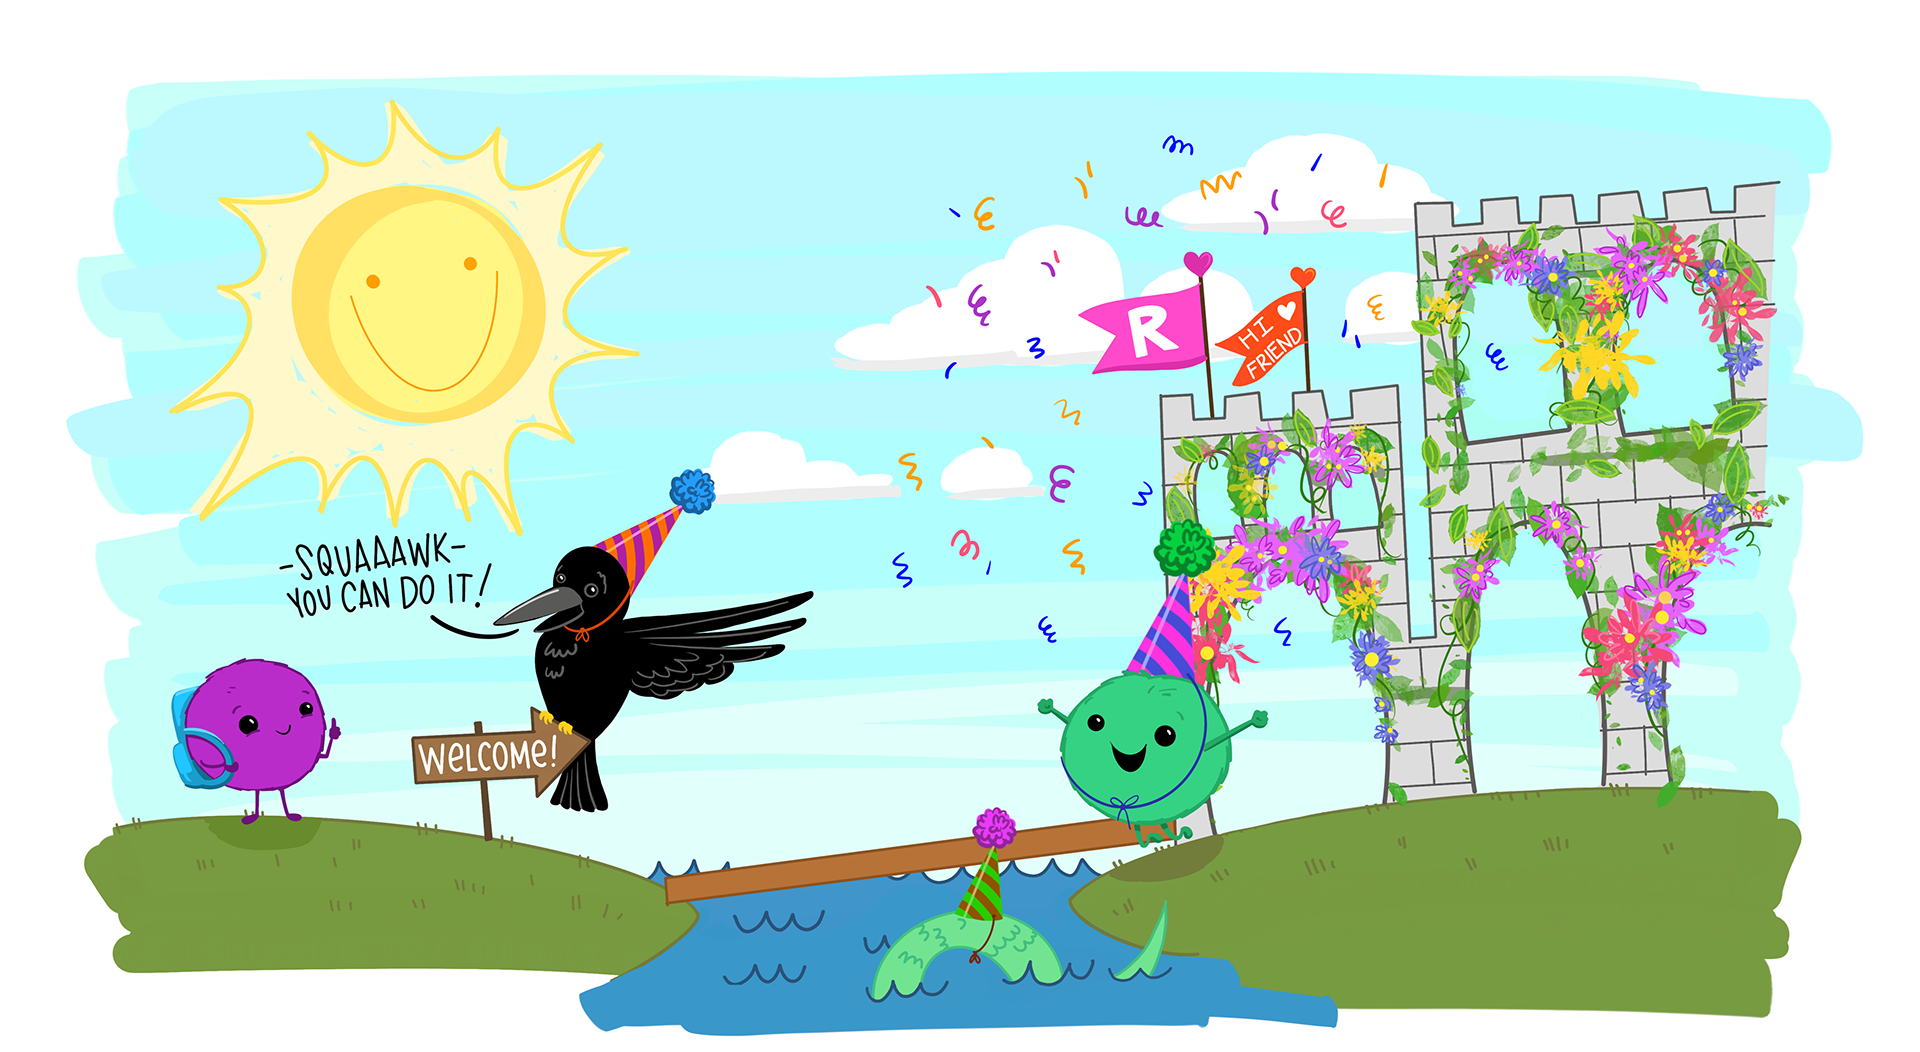 A little purple fuzzy monster wearing a backpack stands just before a drawbridge, leading to a castle covered in flowers and confetti, with flags that say 'R' and 'Hi Friend!' flapping in the wind. A crow wearing a party hat is perched on a welome sign the start of the bridge and says 'SQUAAWK YOU CAN DO IT!'. A green fuzzy monster with a party hat stands on the opposite end of the bridge, in front of the castle, with it's arms outstretched.